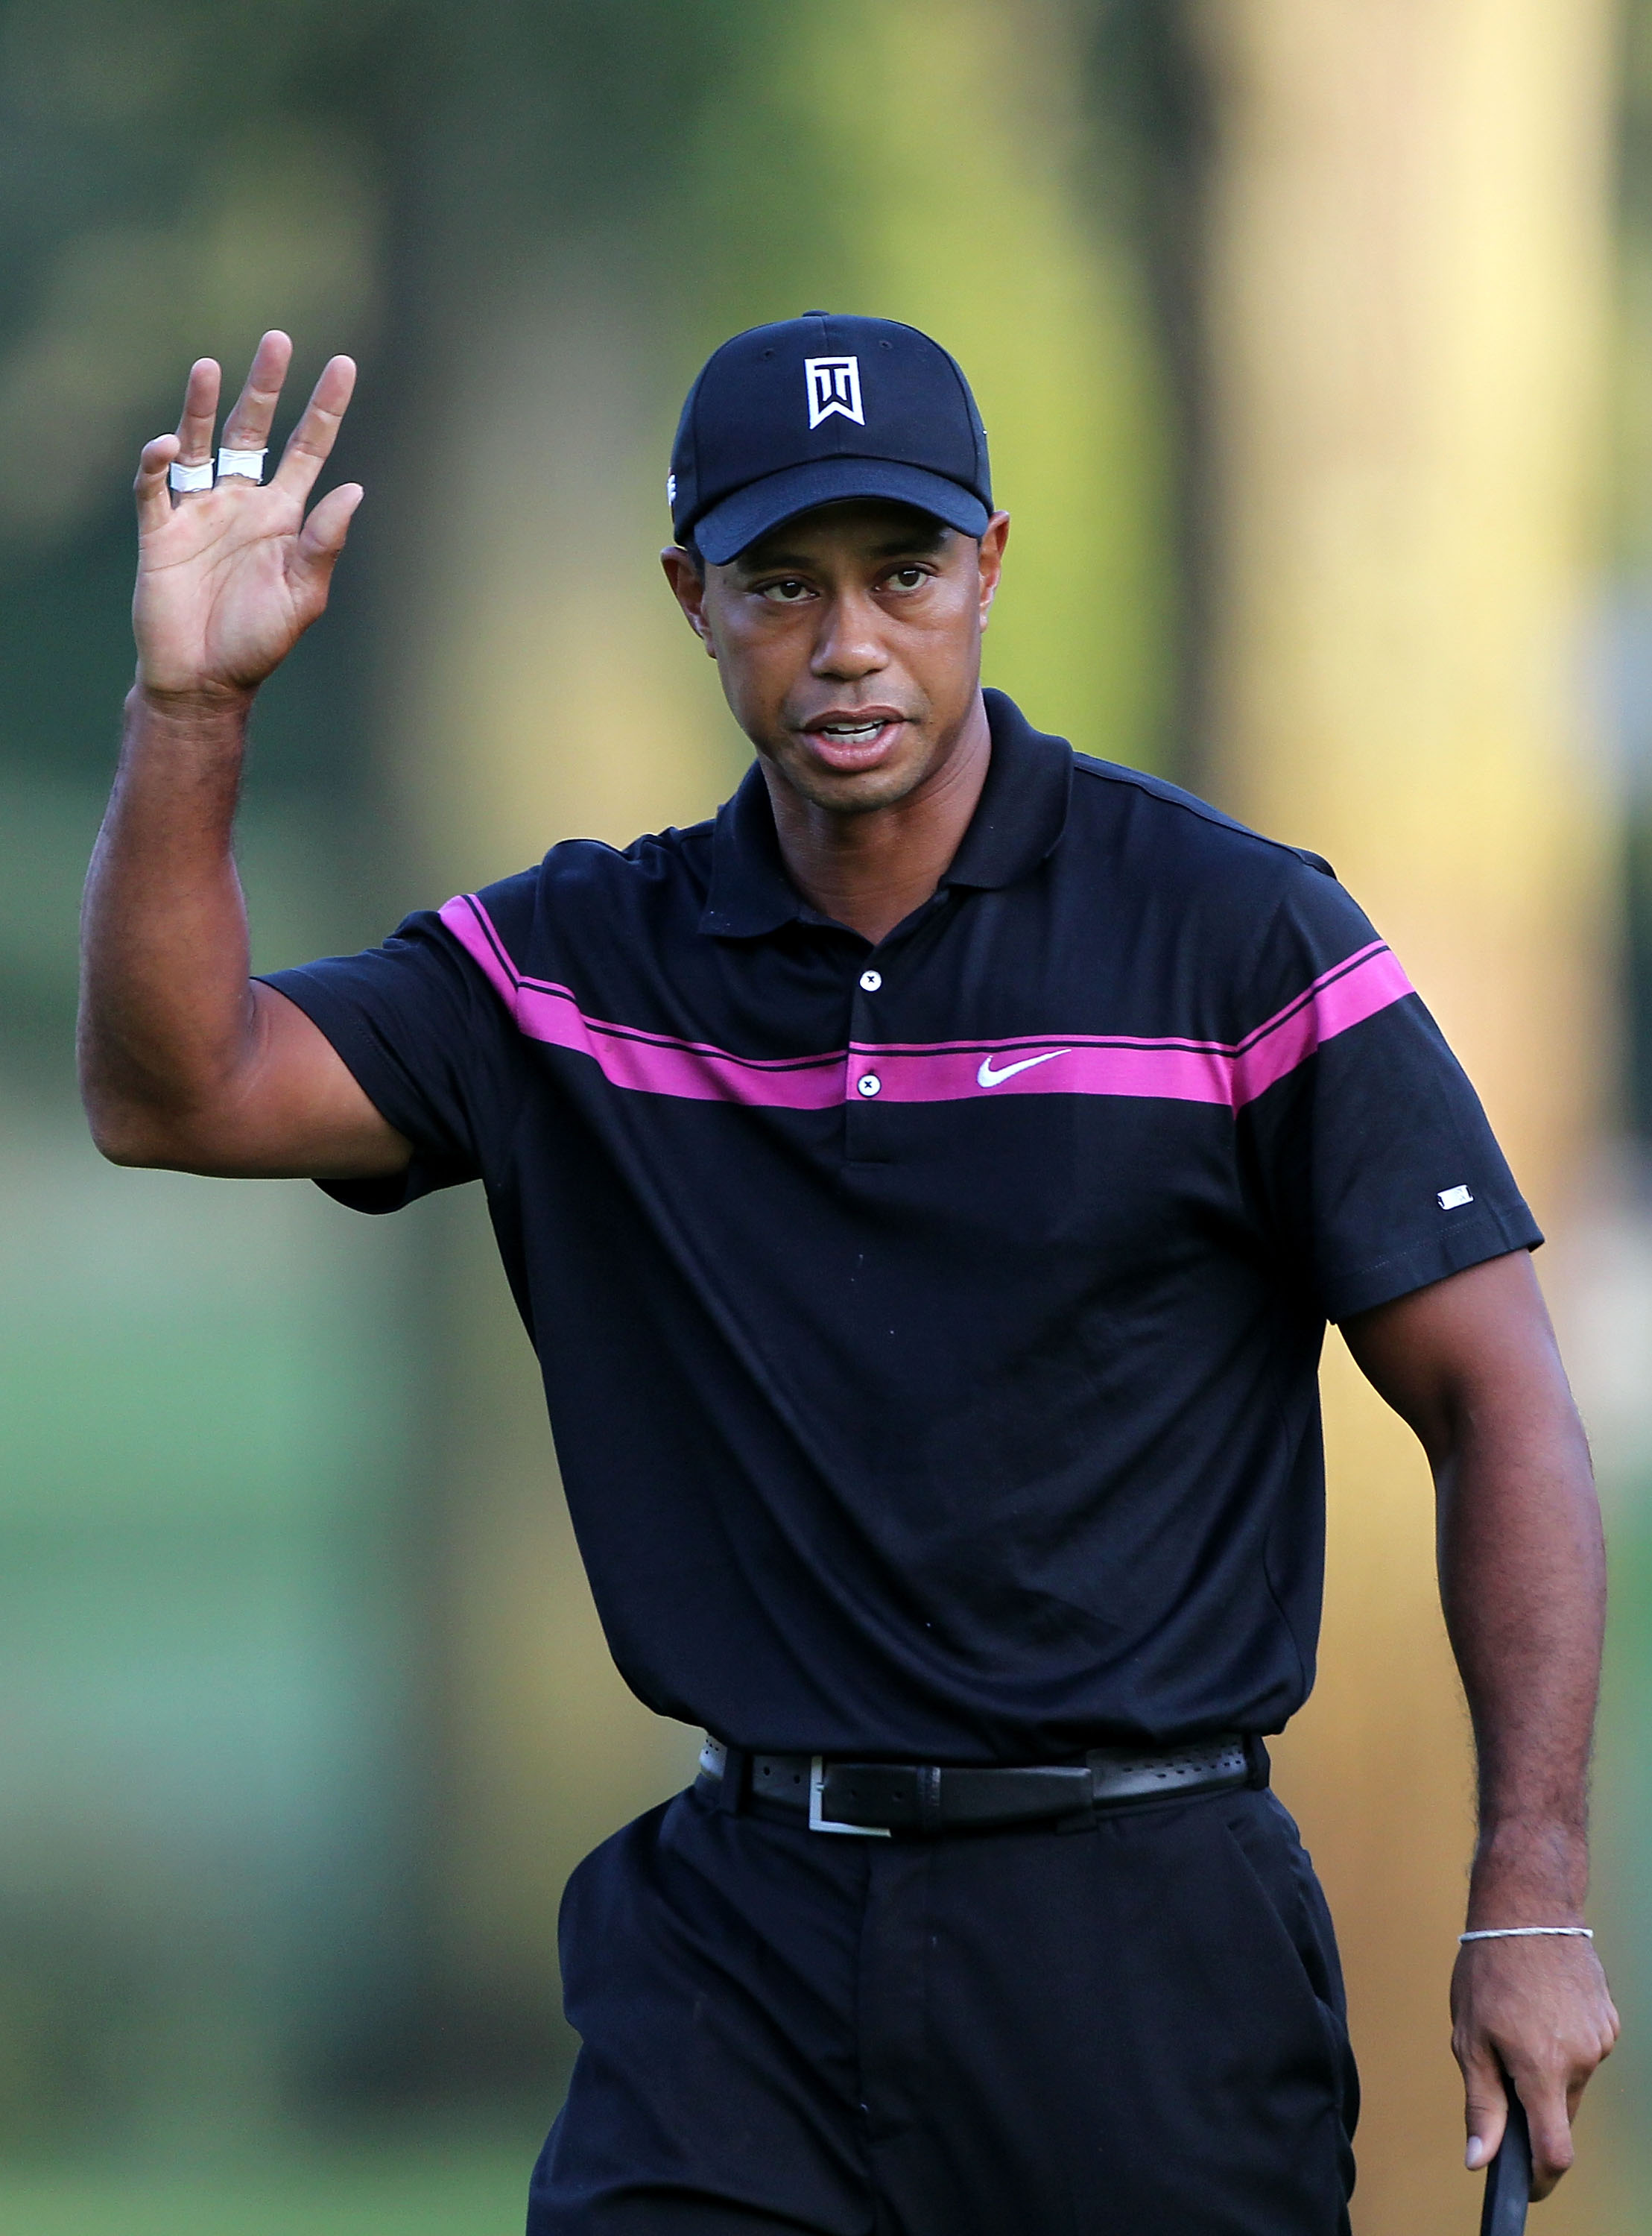 PARAMUS, NJ - AUGUST 26:  Tiger Woods reacts after he made a birdie putt on the first hole during the first round of The Barclays at the Ridgewood Country Club on August 26, 2010 in Paramus, New Jersey.  (Photo by Hunter Martin/Getty Images)